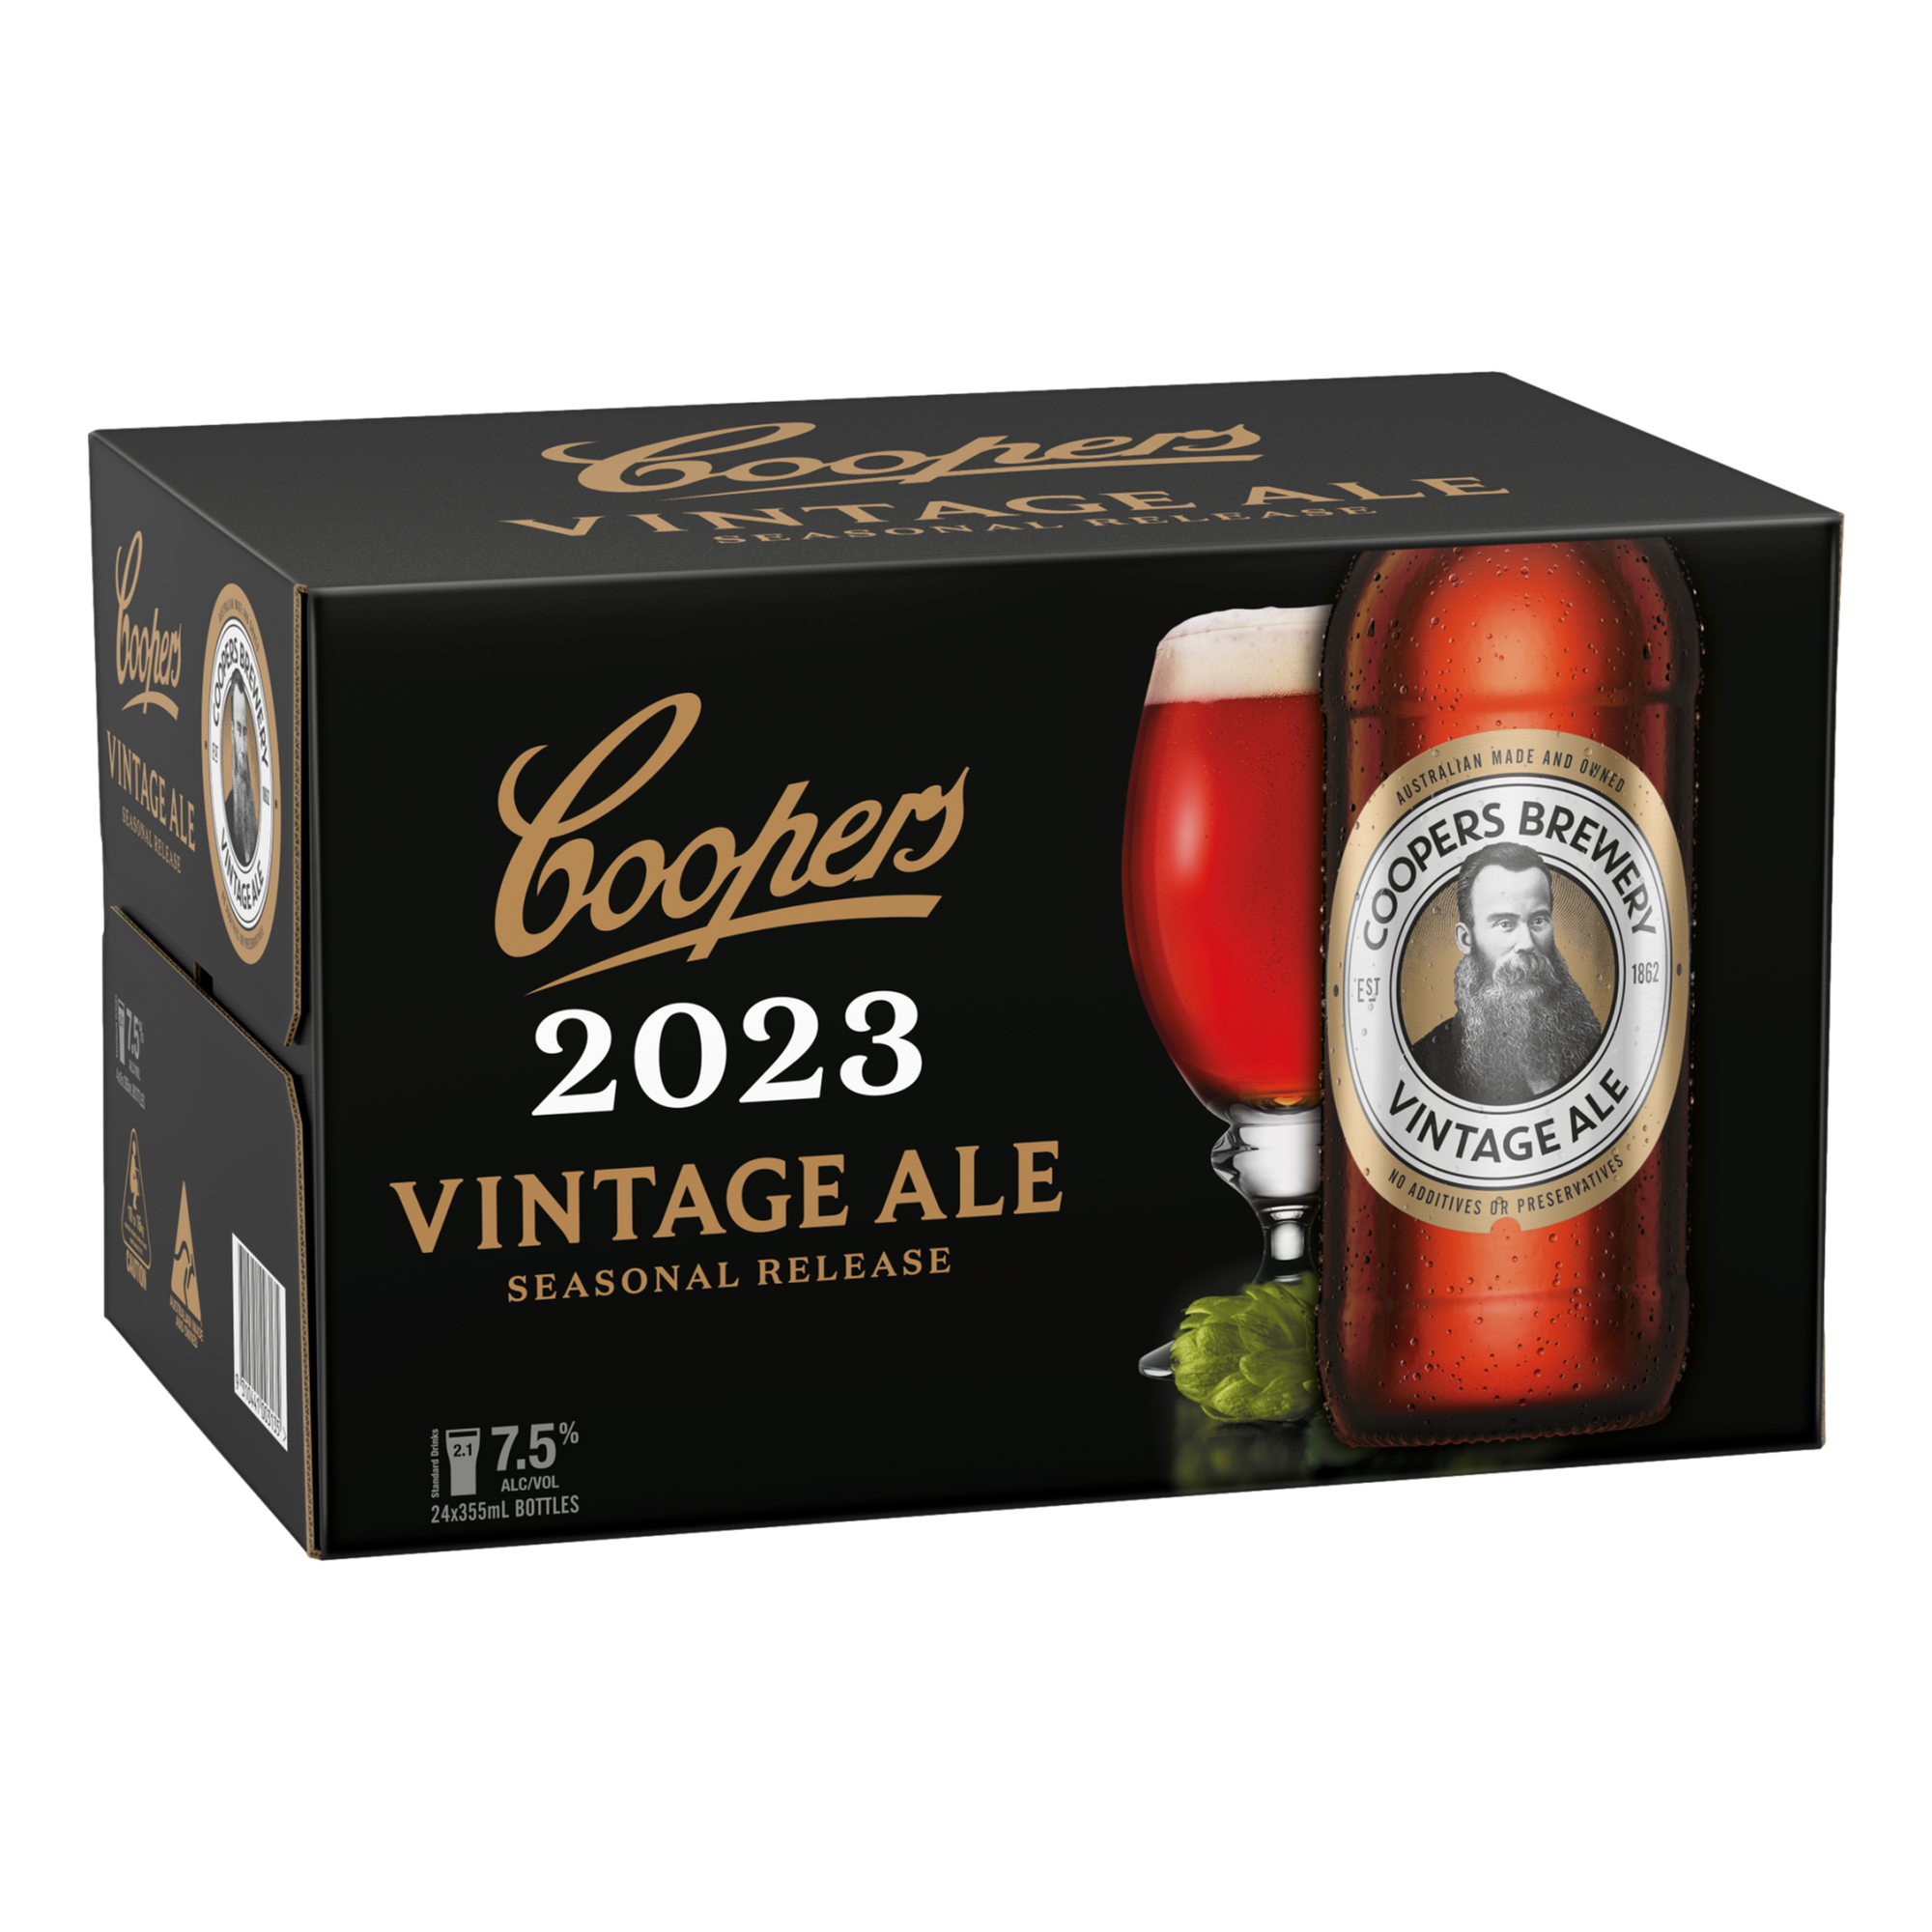 Coopers Extra Strong Vintage Ale 2023 7.5% 355ml Bottle Case of 24